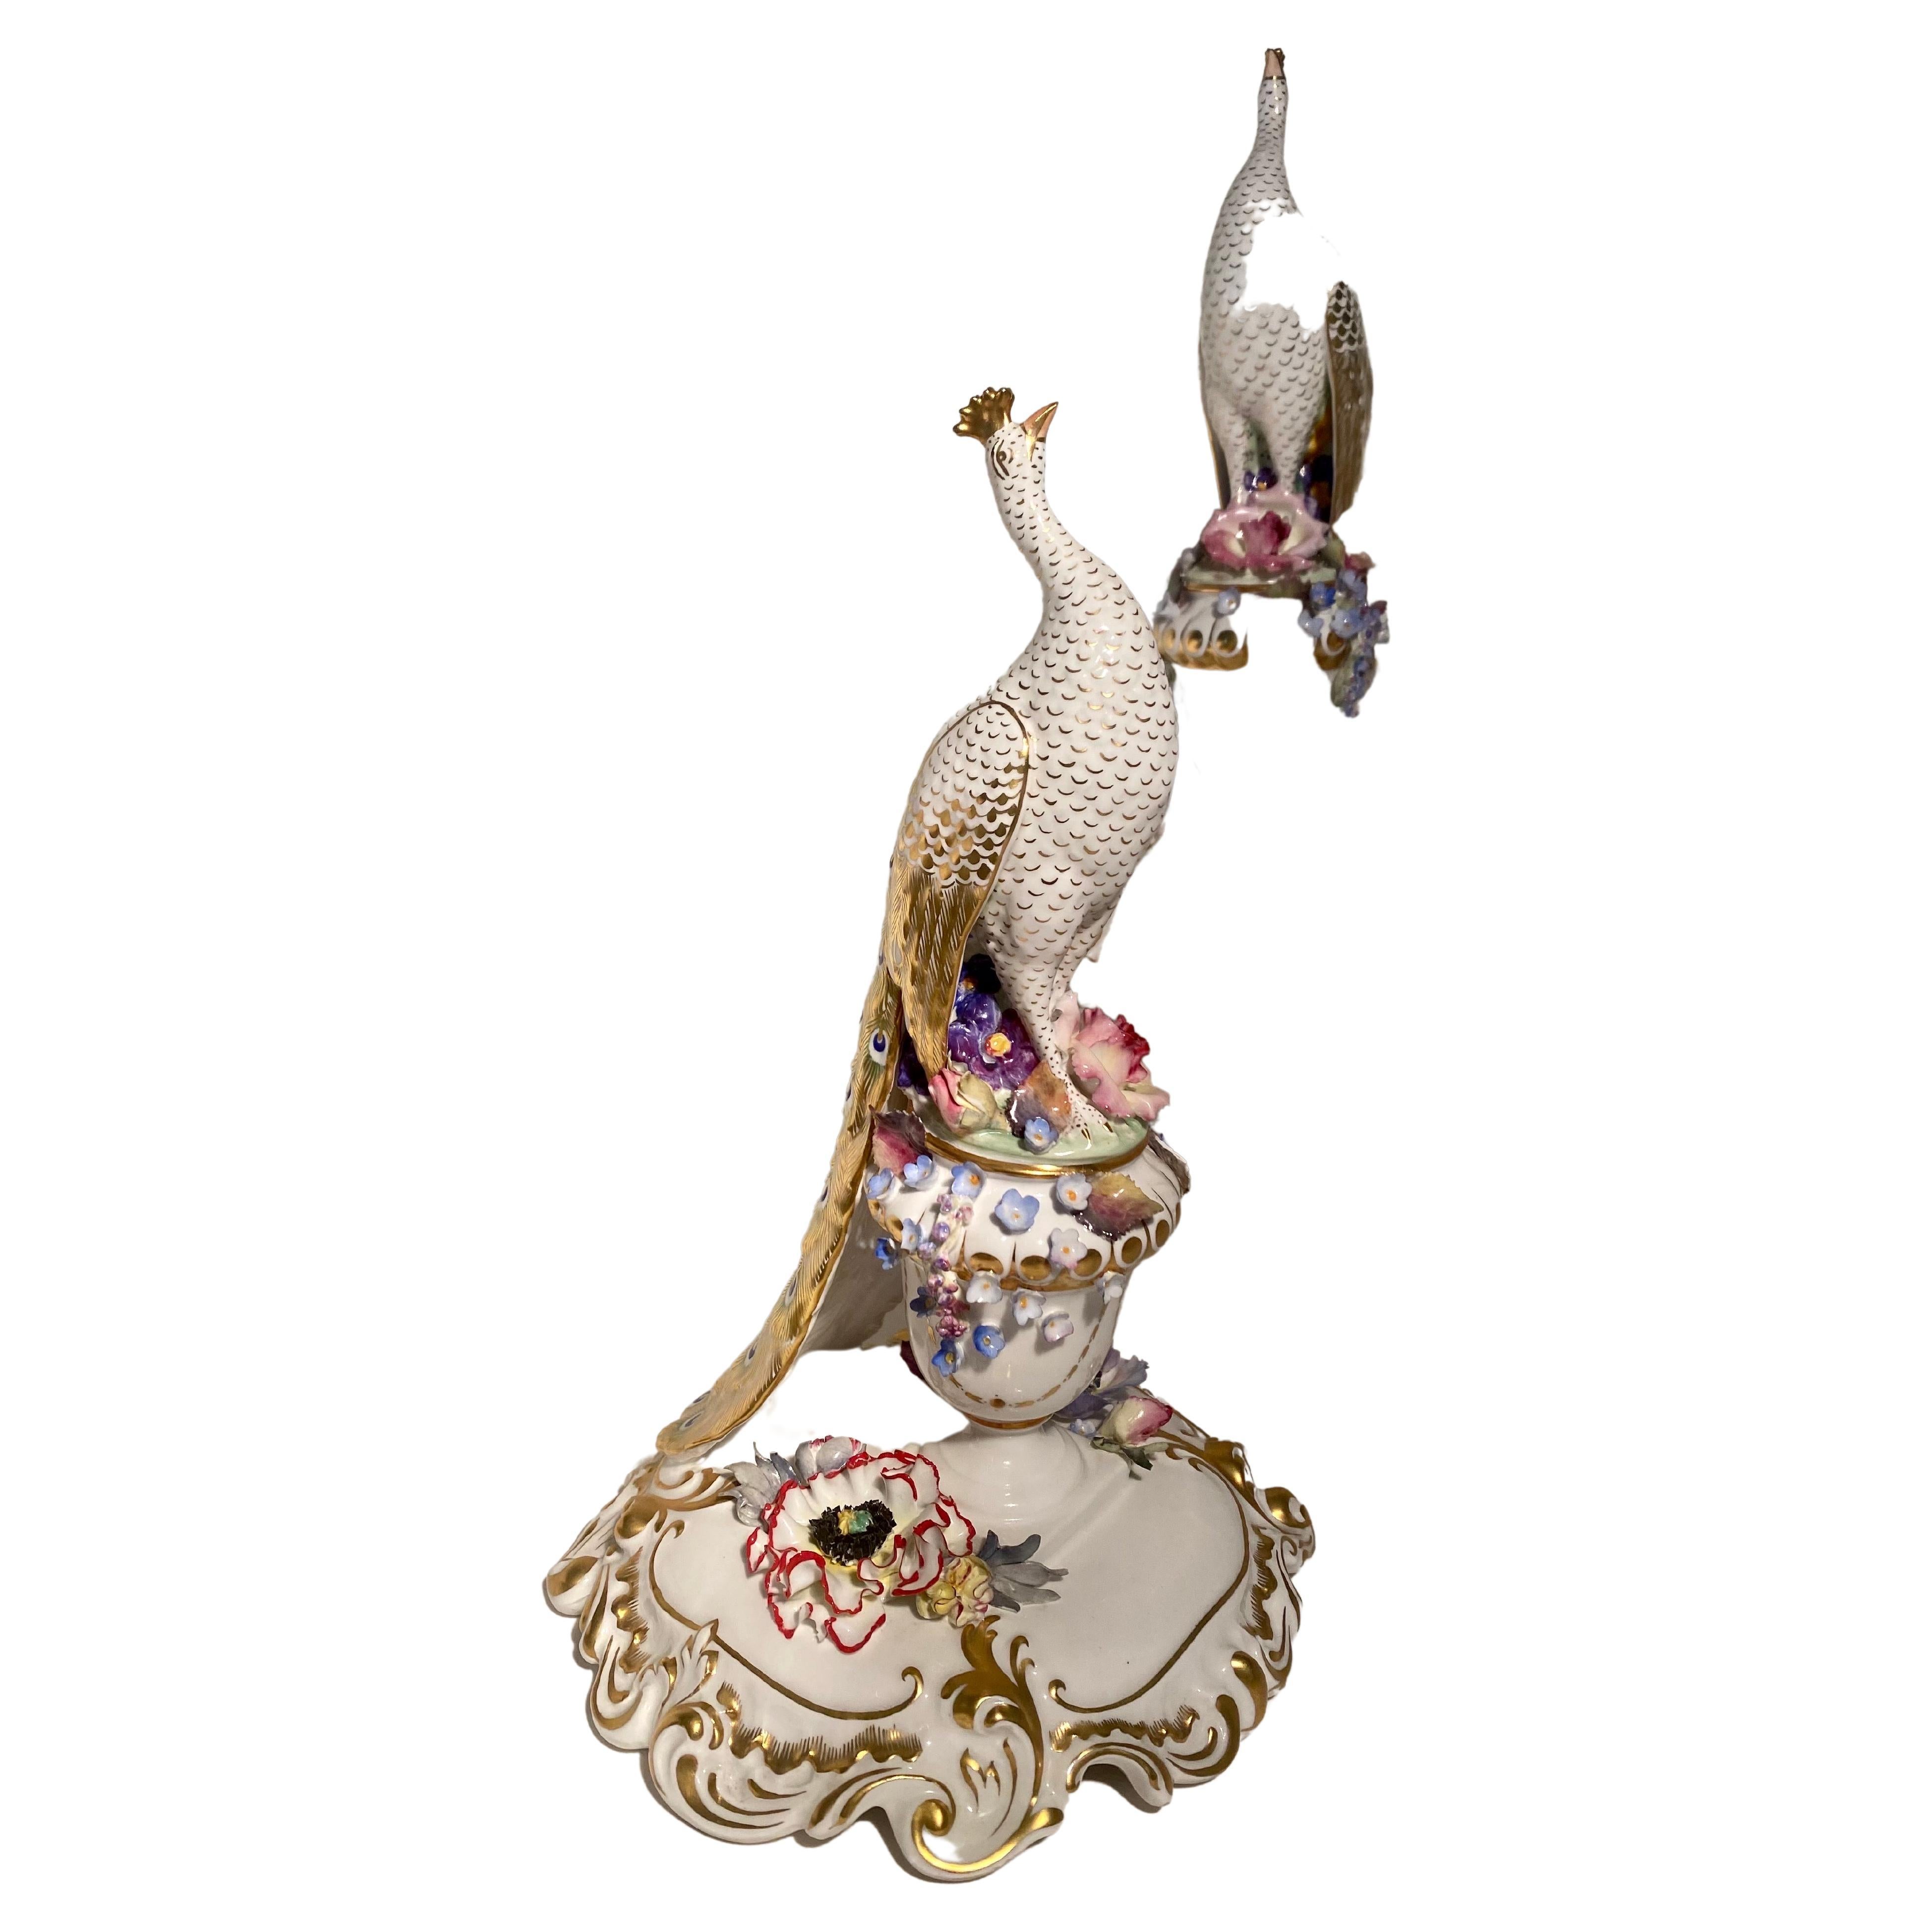 Royal Crown Derby Porcelain Figure, Modelled as a Peacock For Sale 6